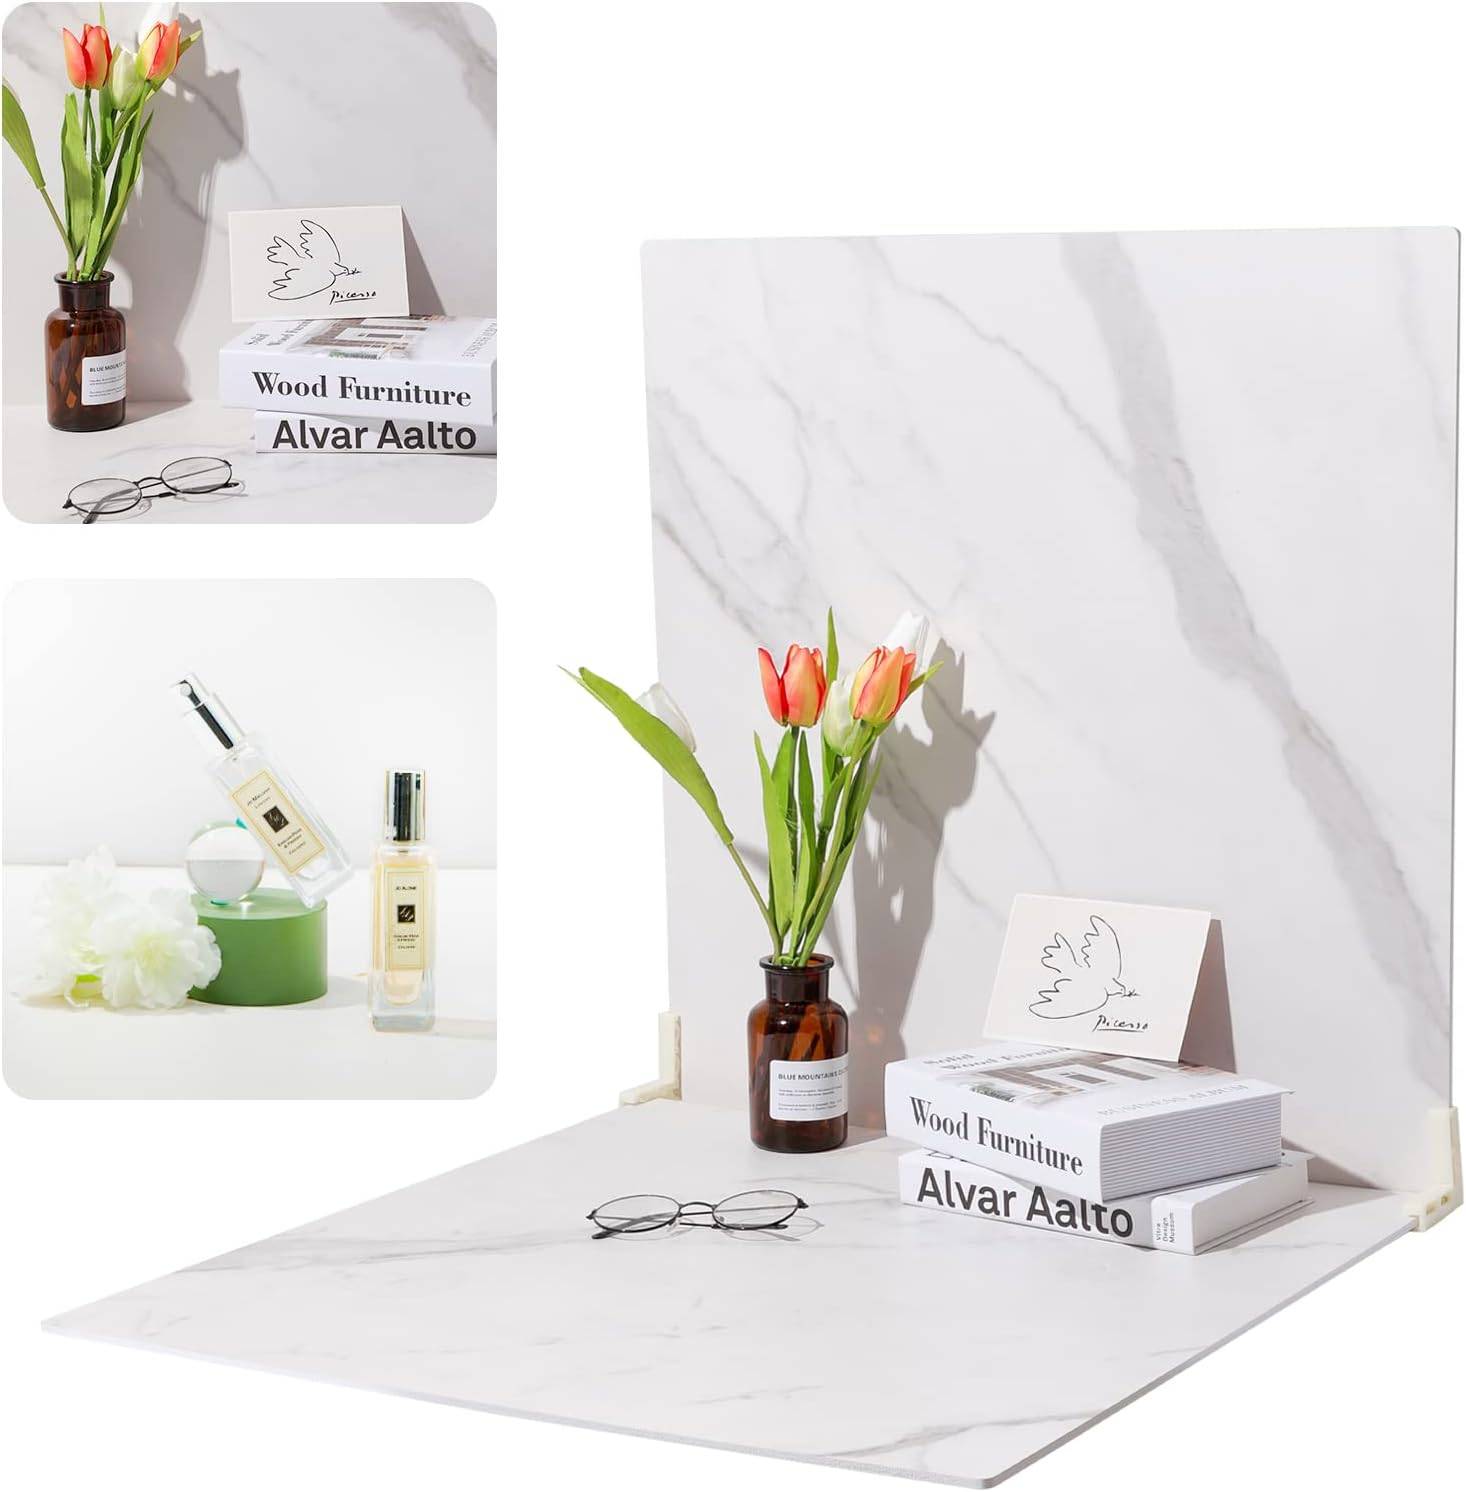 BEIYANG 2 Marble 24x24" Backdrop Boards for Flat Lay